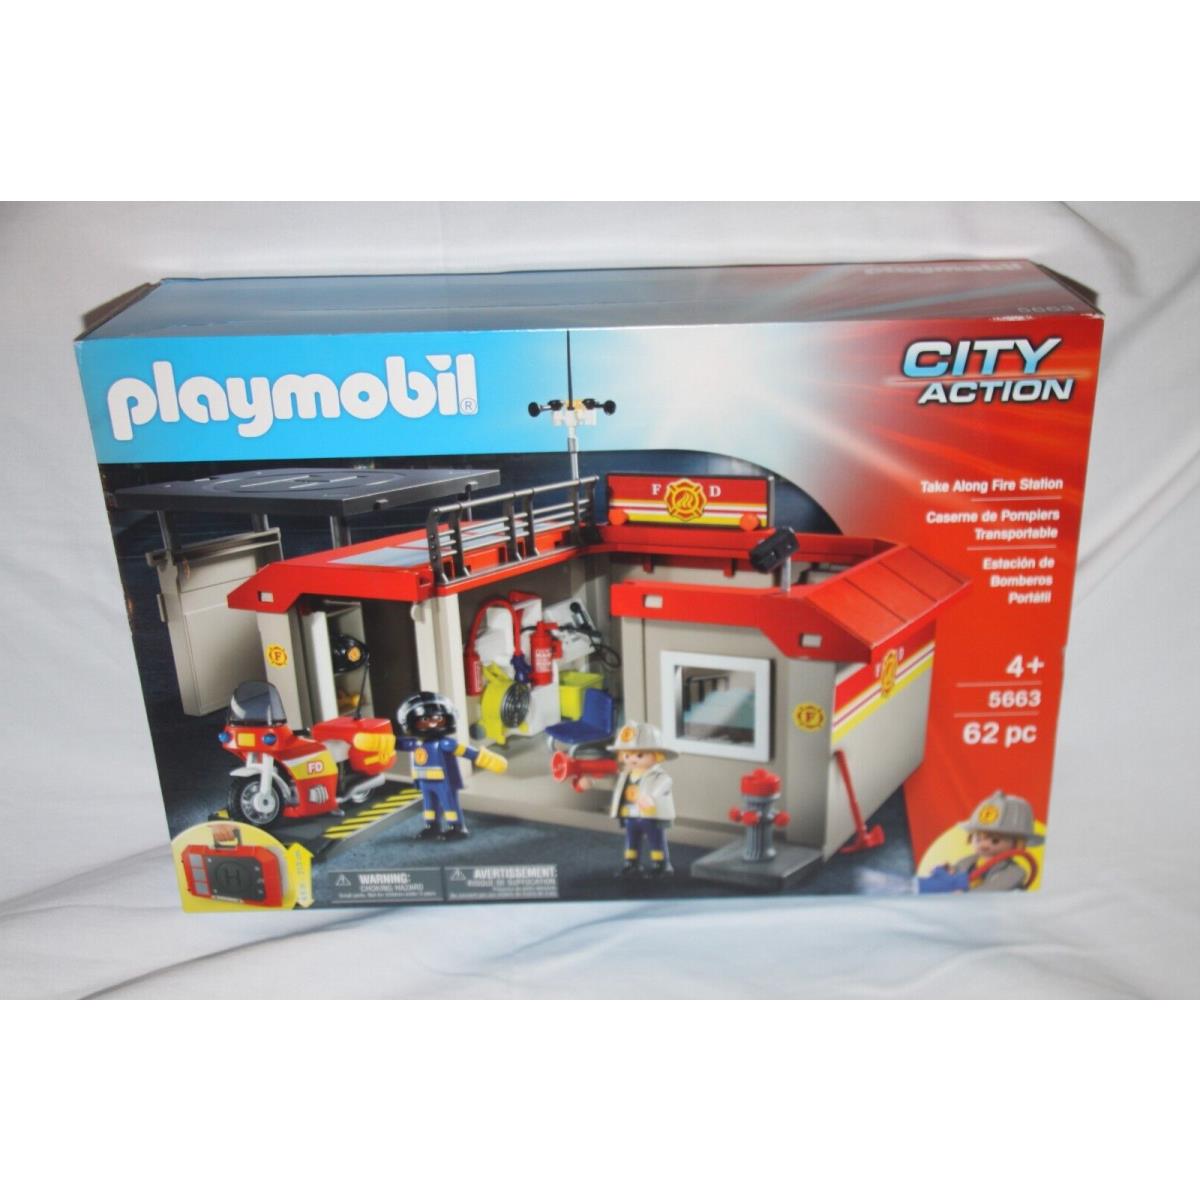 Playmobil 5663 City Action Take Along Fire Station Motorcycle 2015